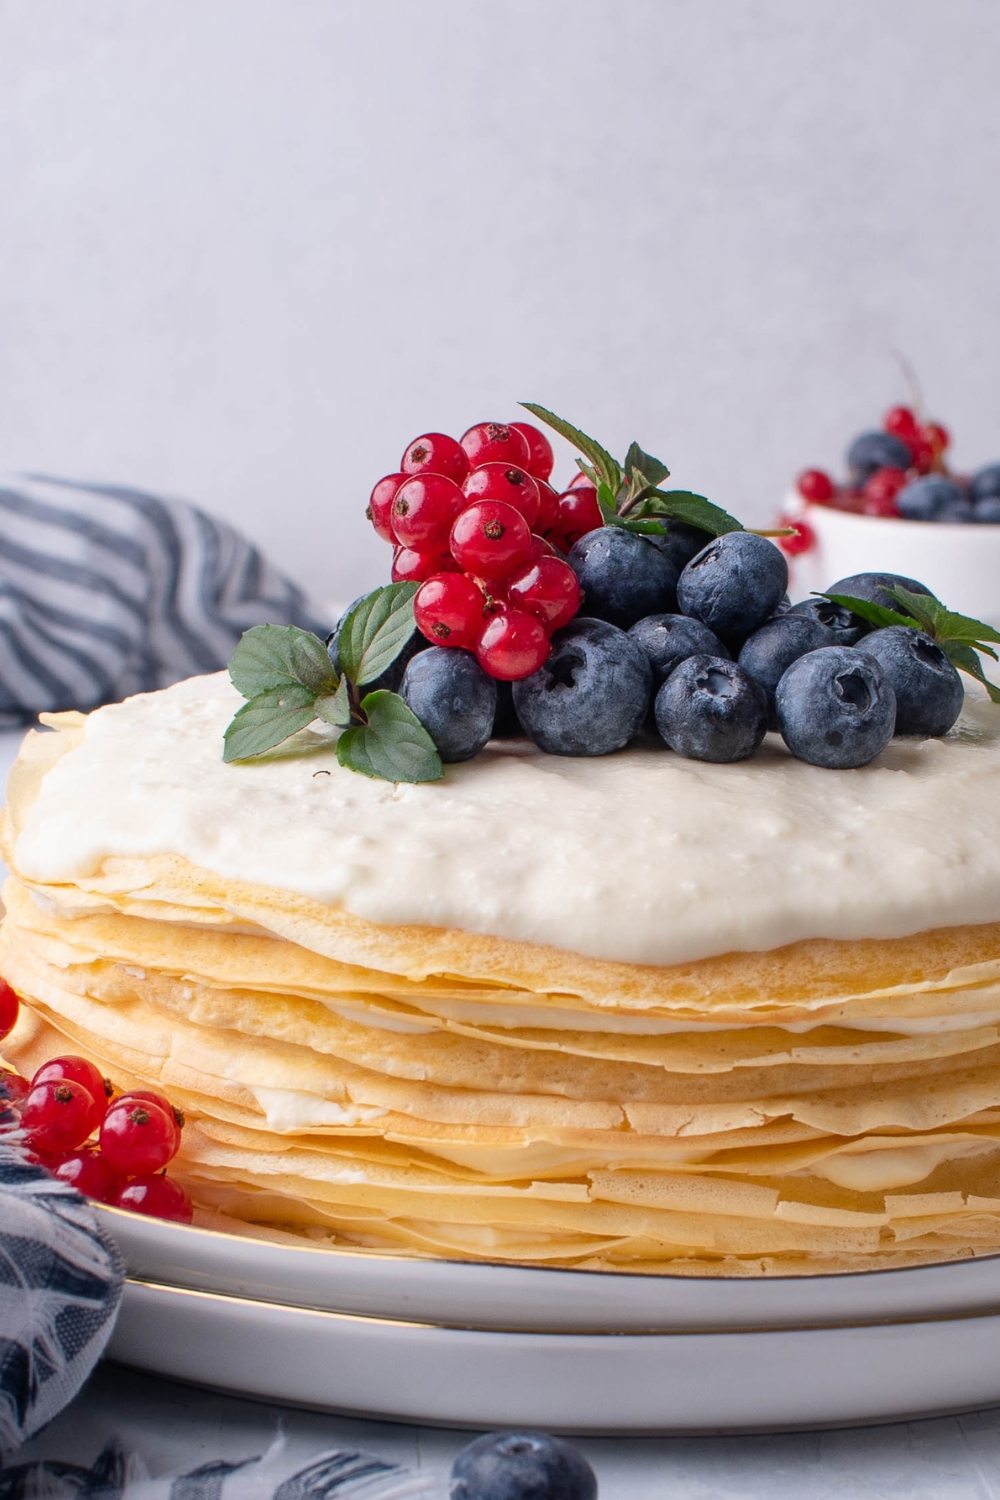 A close up of an entire crepe cake topped with blueberries and grapes.